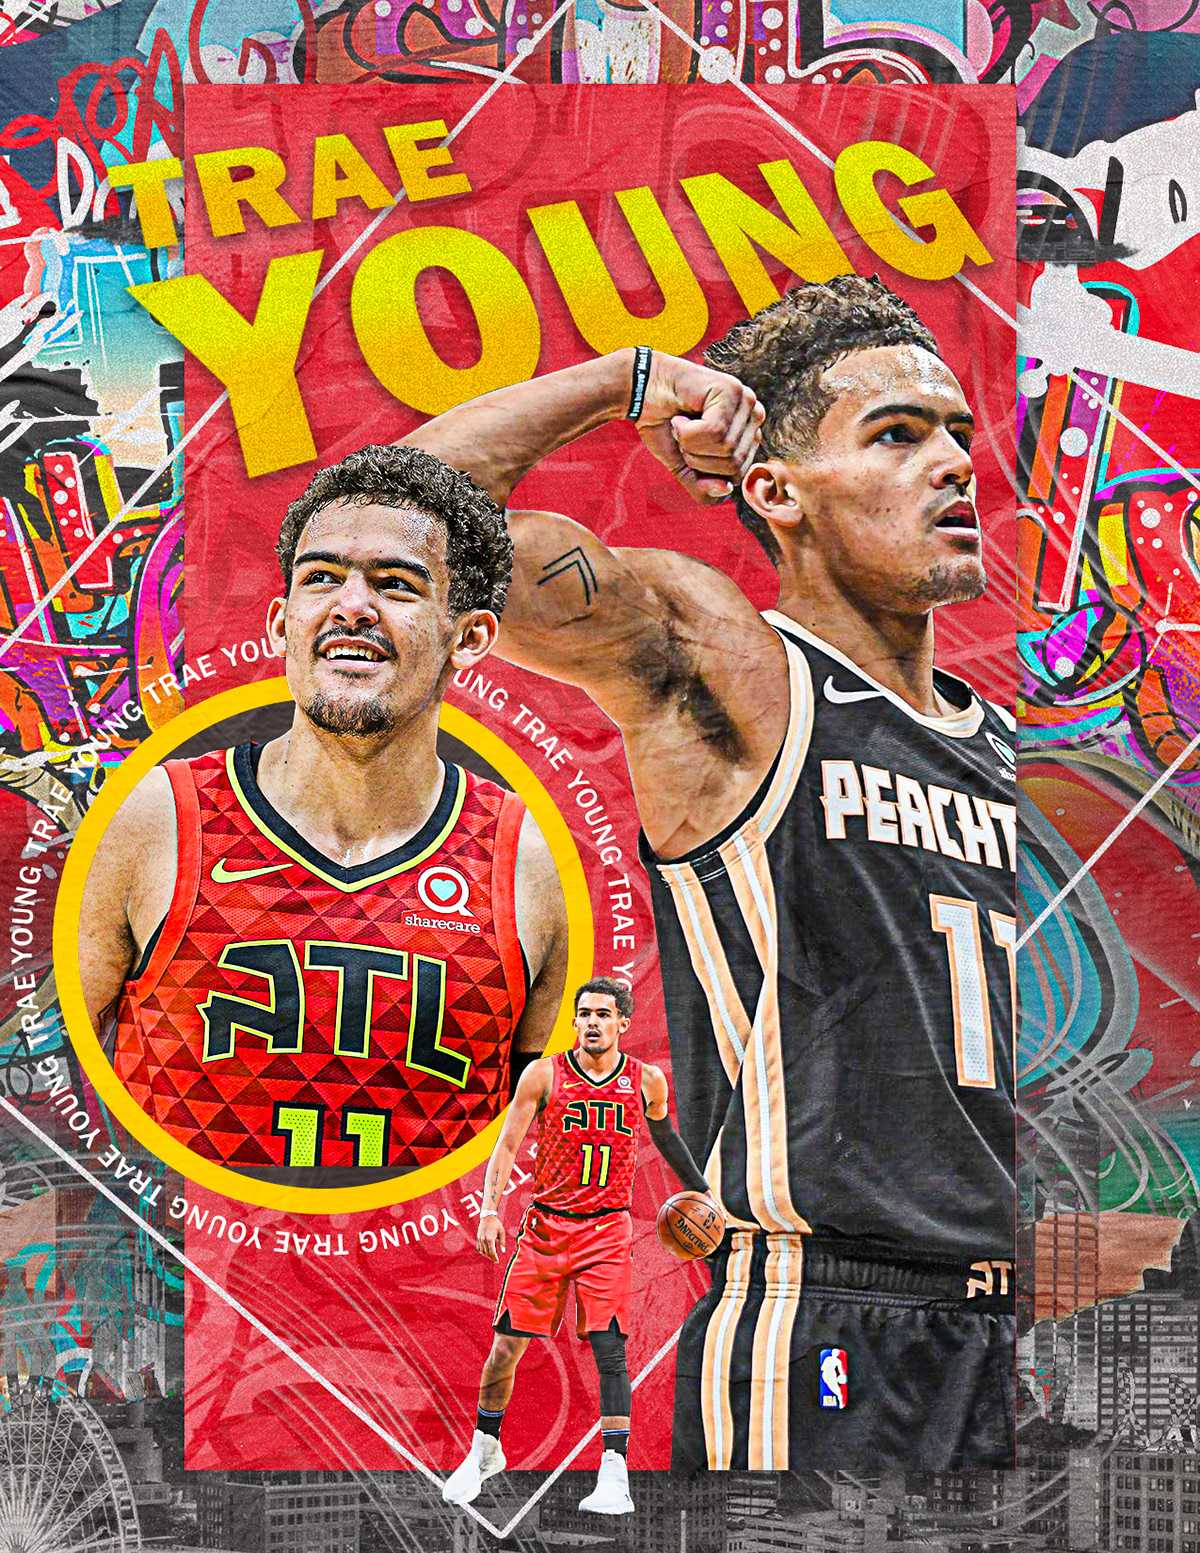 Trae Young Iphone Wallpaper